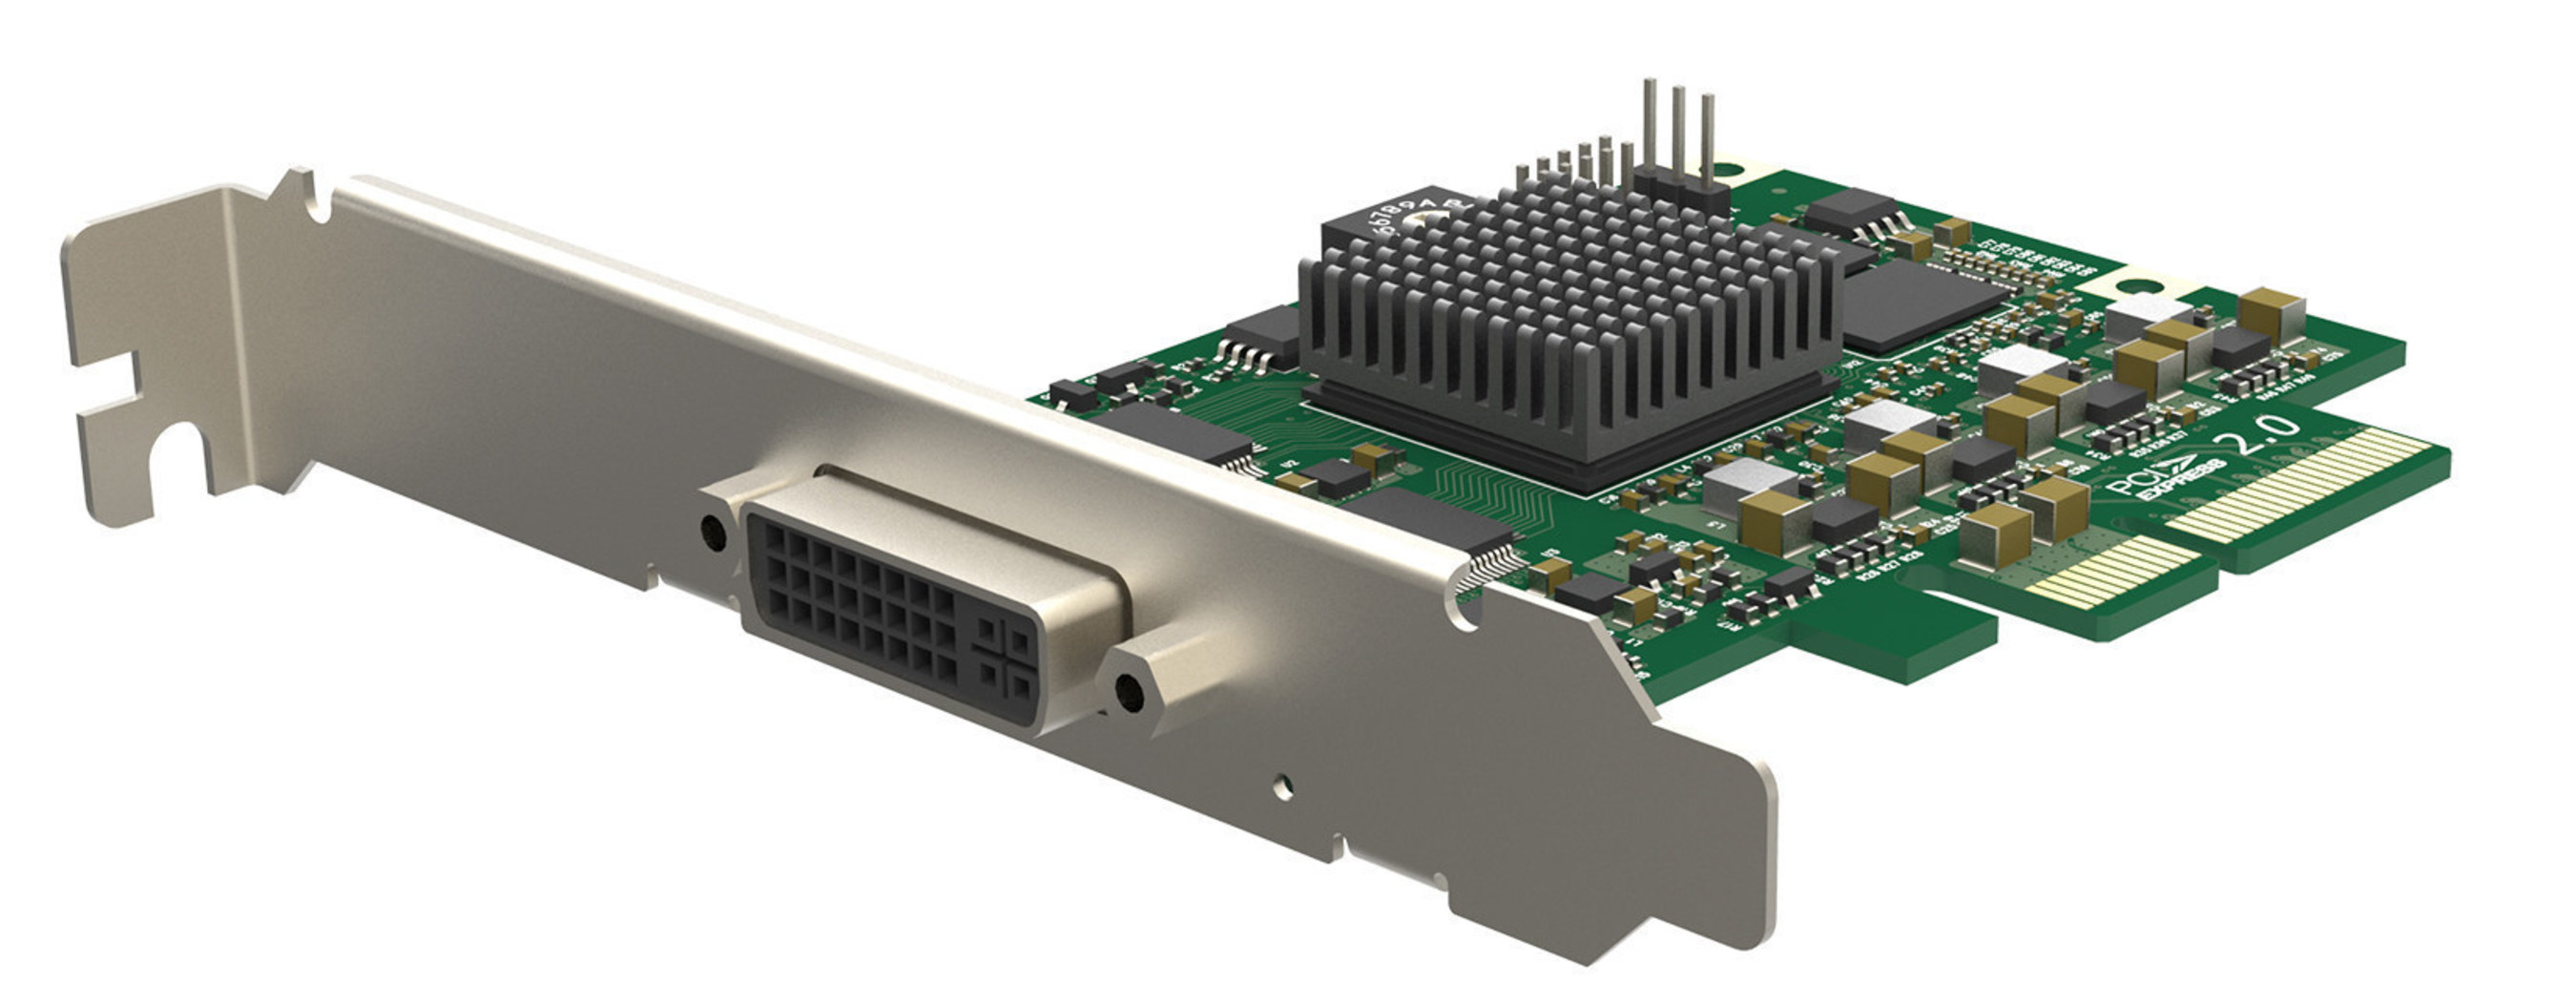 Magewell's new Pro Capture DVI 4K video capture card supports single-link and dual-link DVI inputs with CPU-saving, high-quality, hardware-based 4K video processing.